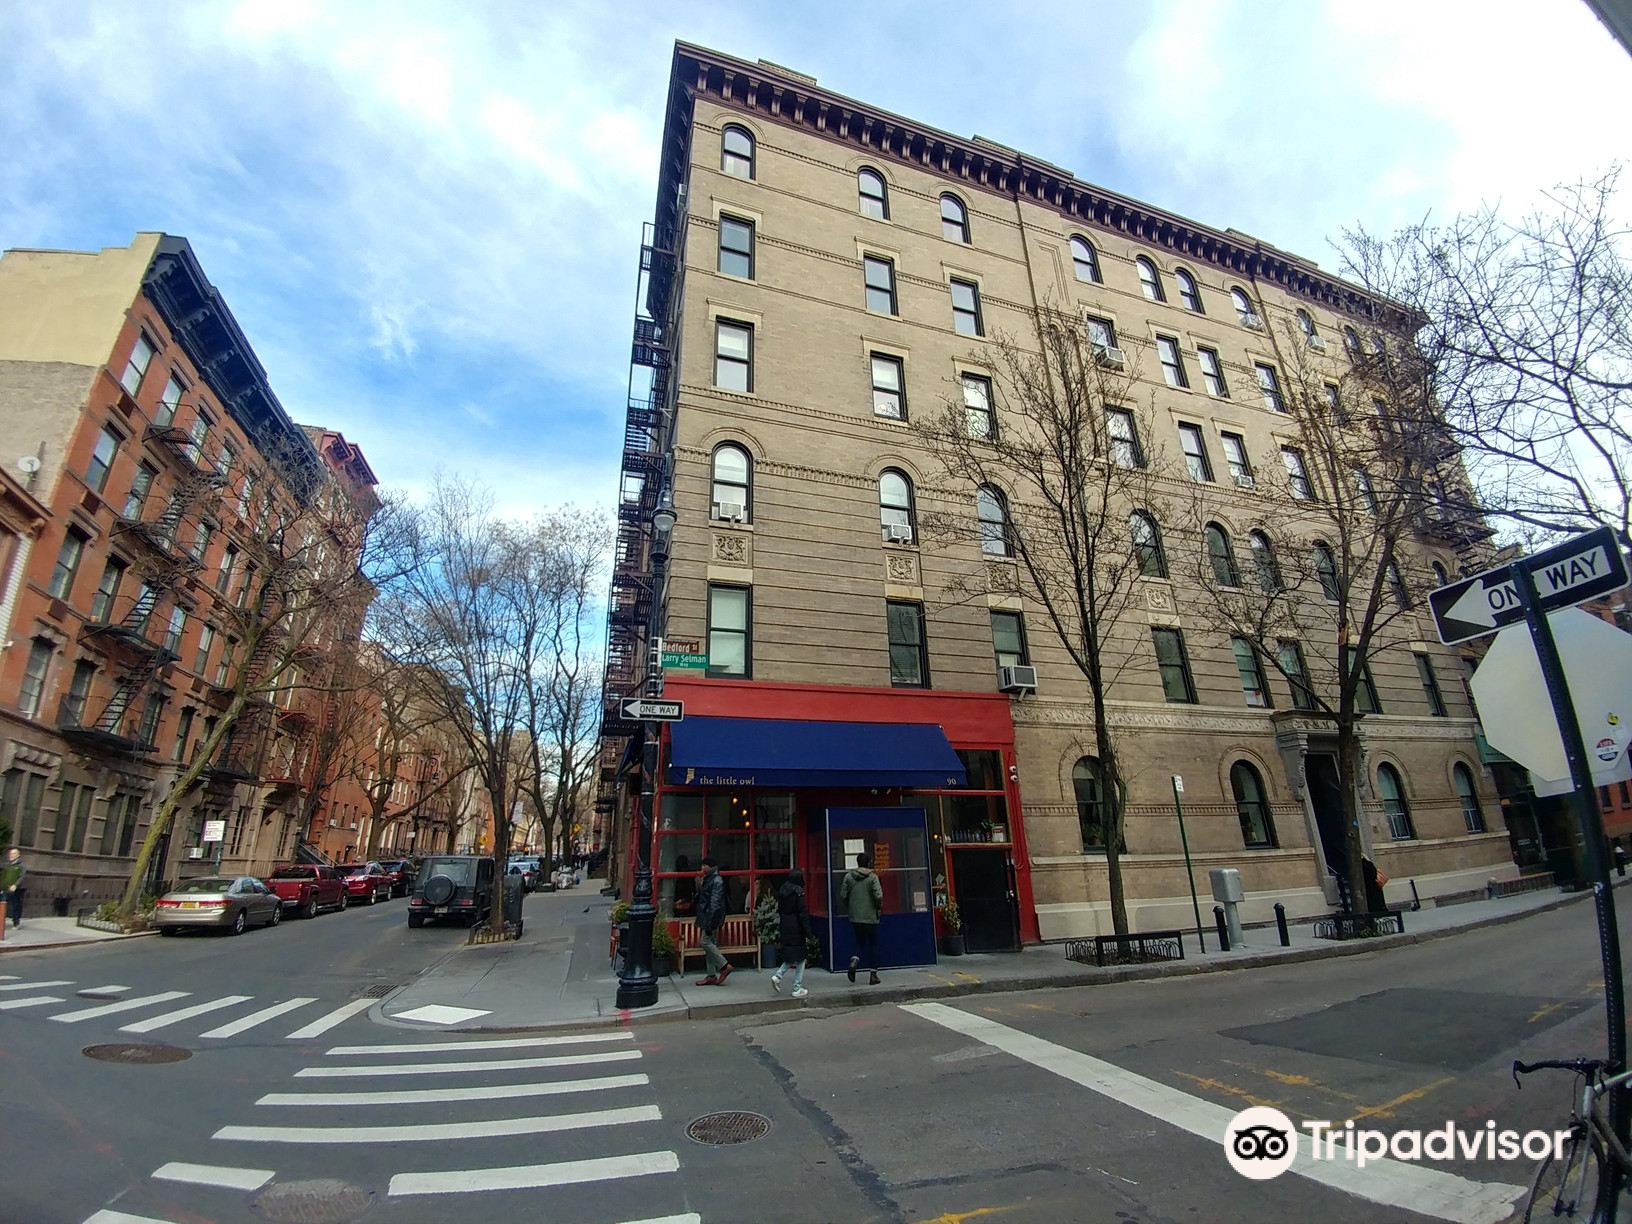 ▷Where to see the Friends apartment building in NYC?